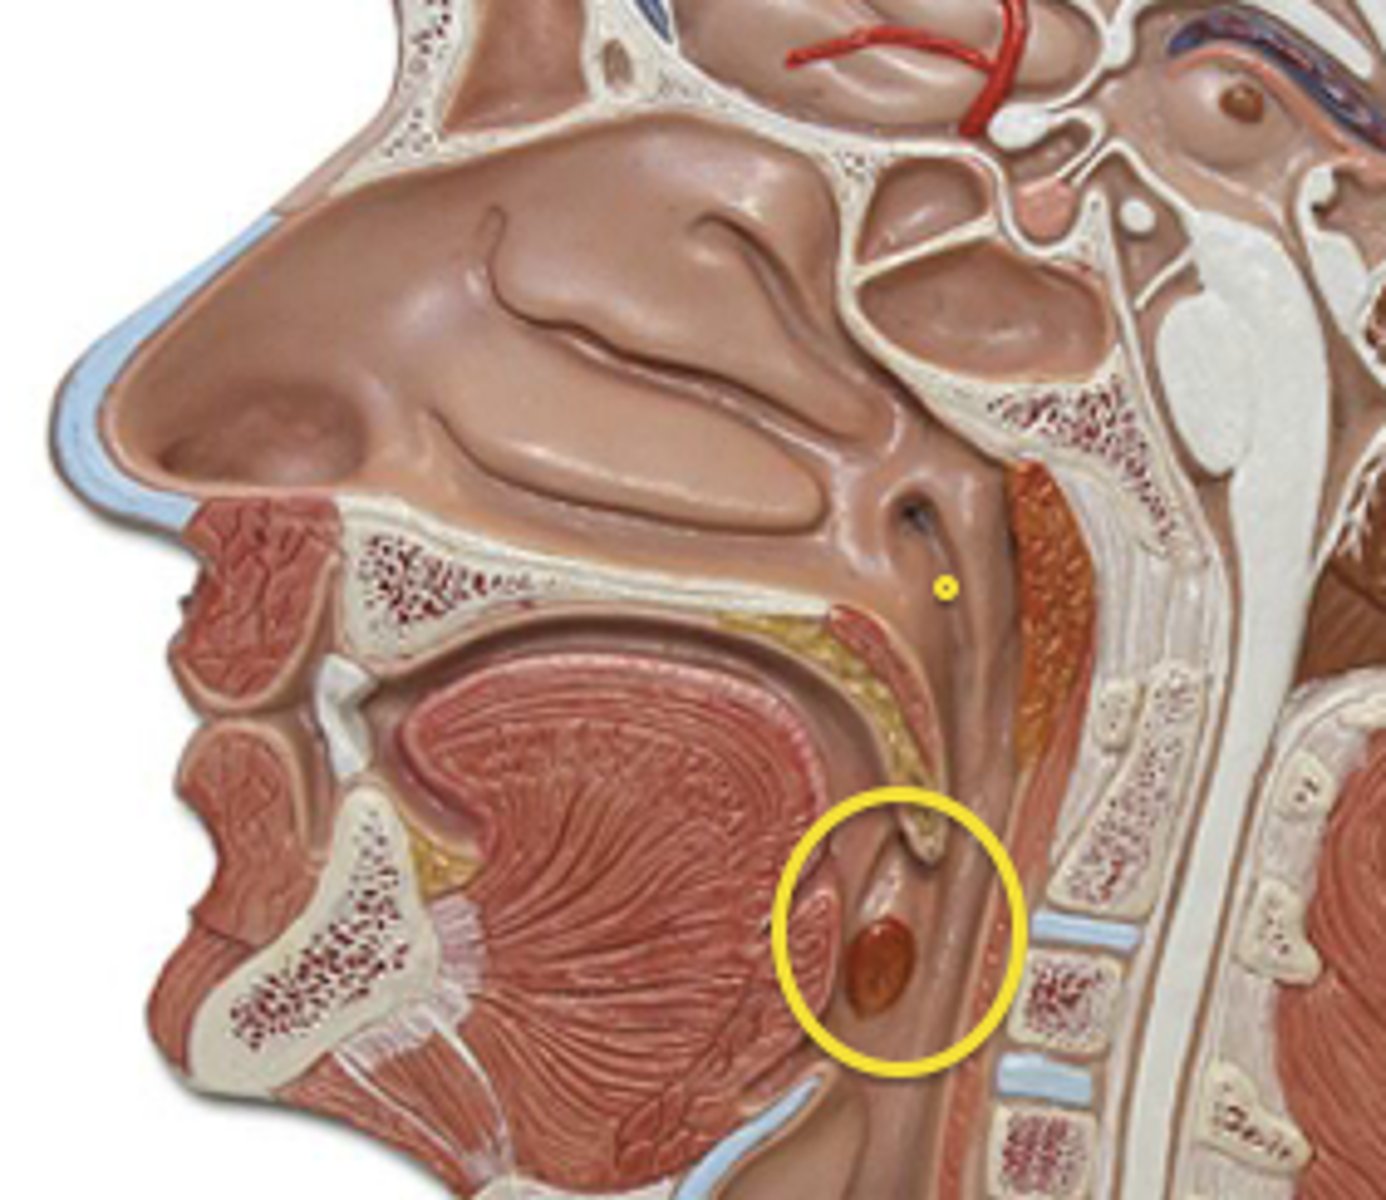 <p>The epiglottis is part of which section of the pharynx?</p>